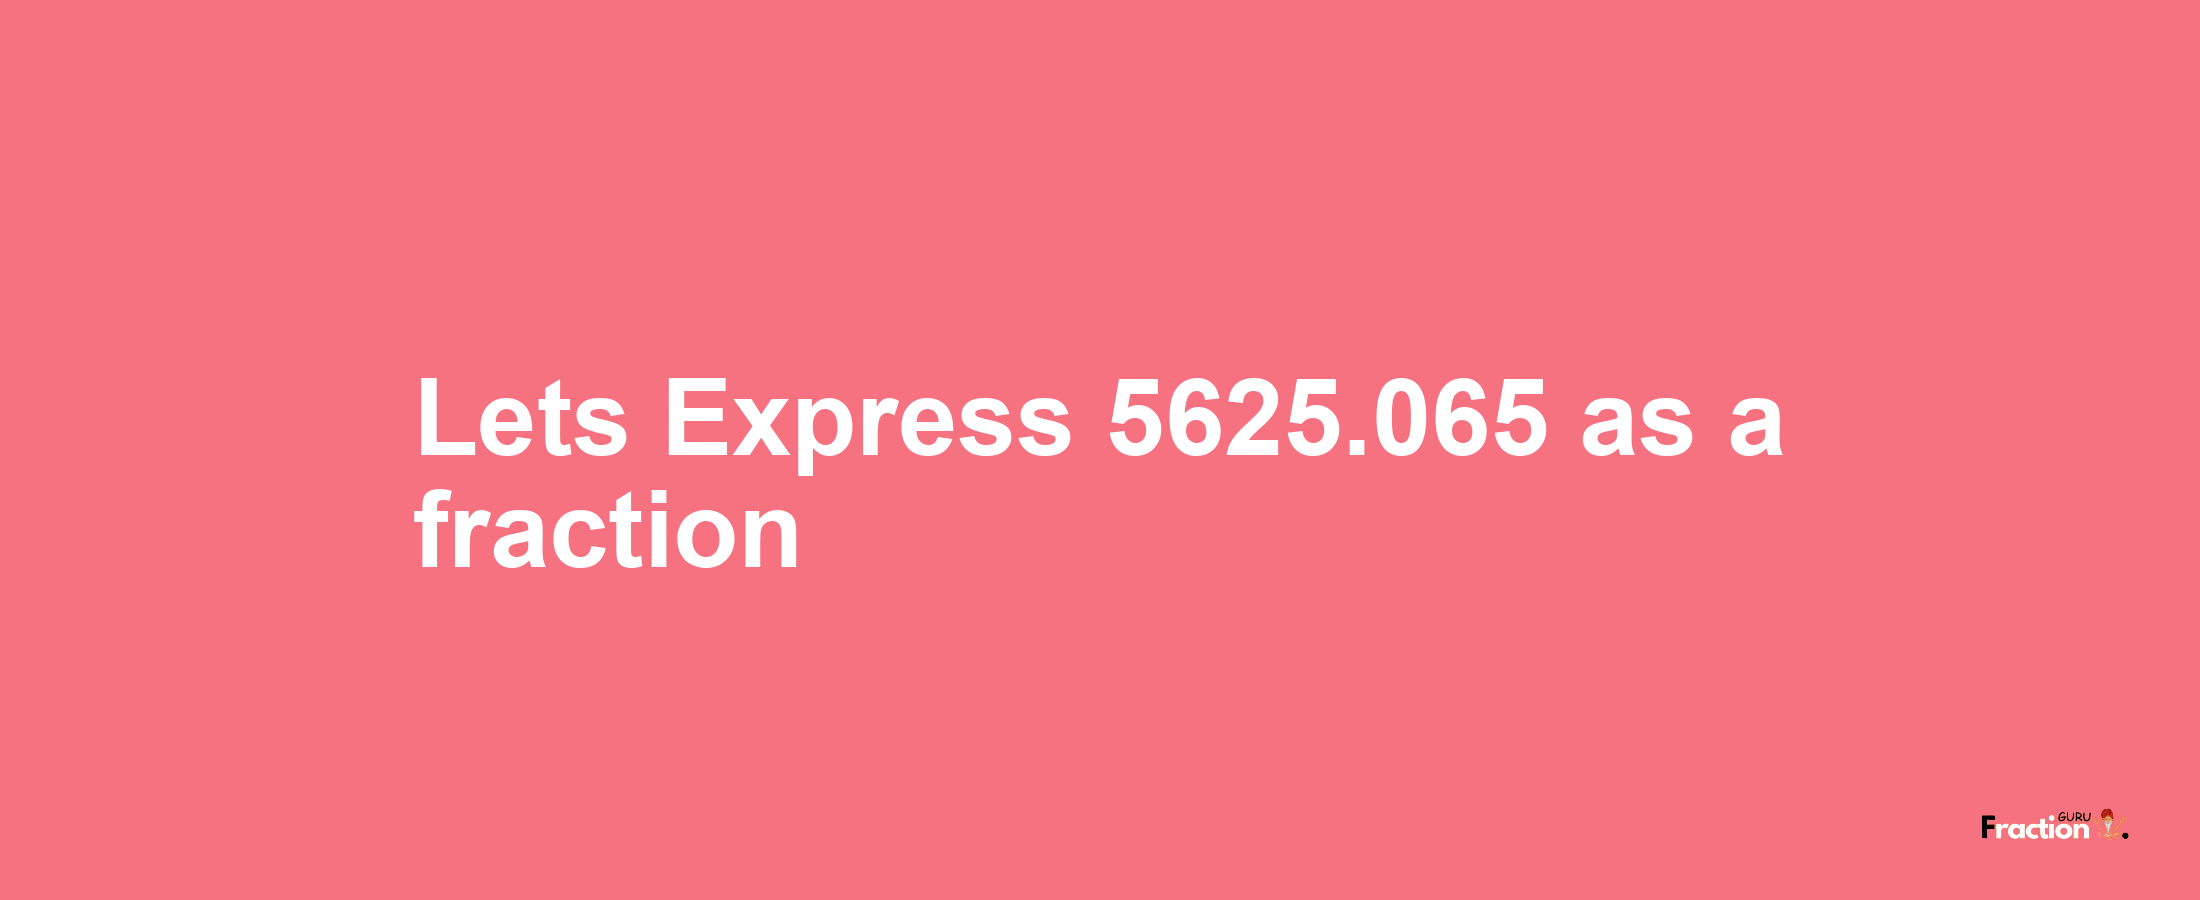 Lets Express 5625.065 as afraction